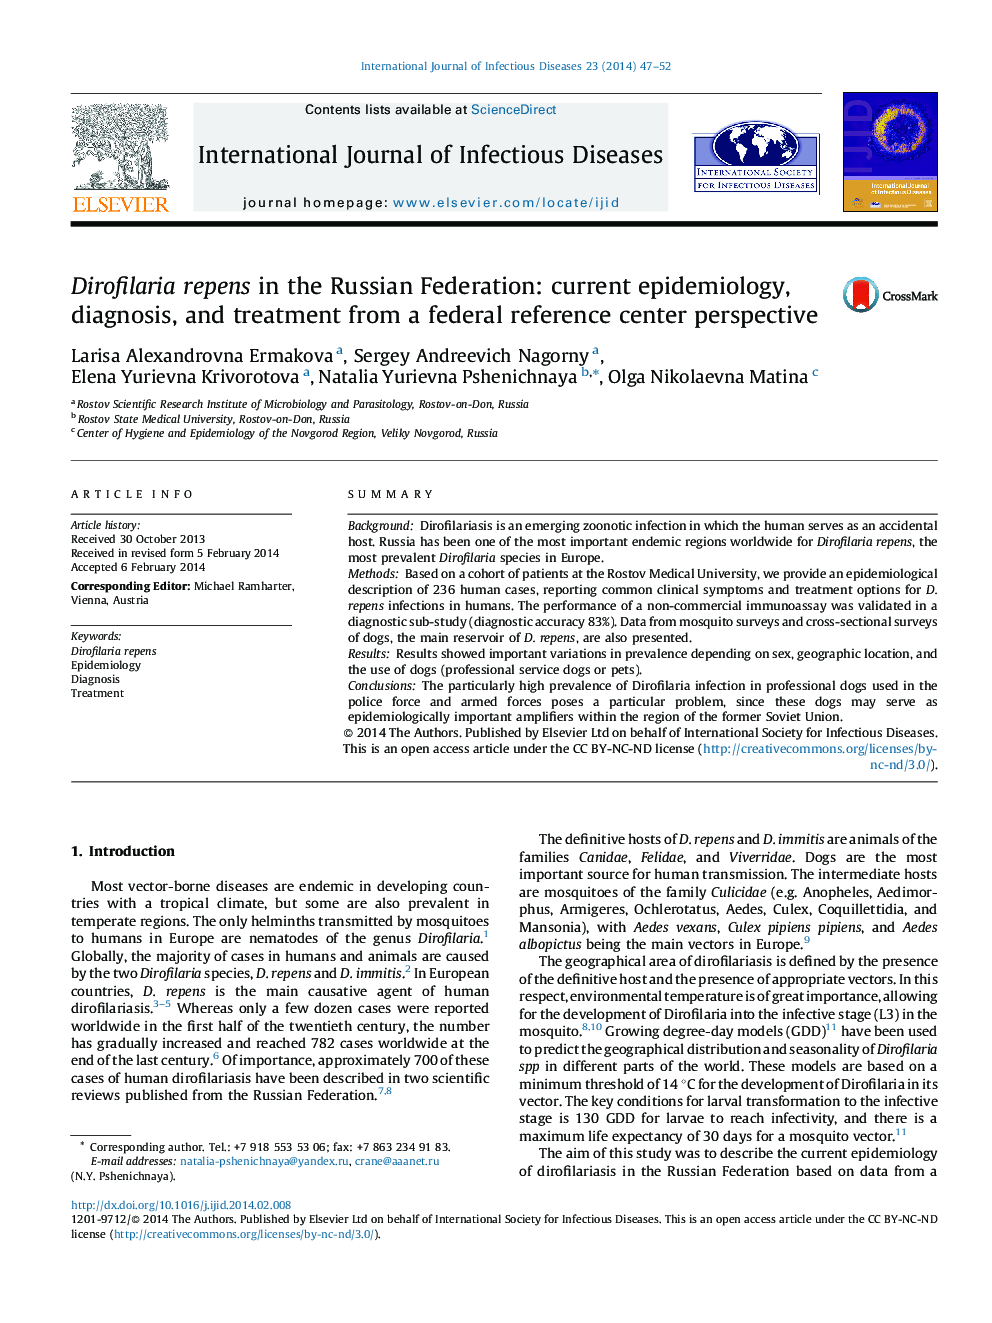 Dirofilaria repens in the Russian Federation: current epidemiology, diagnosis, and treatment from a federal reference center perspective